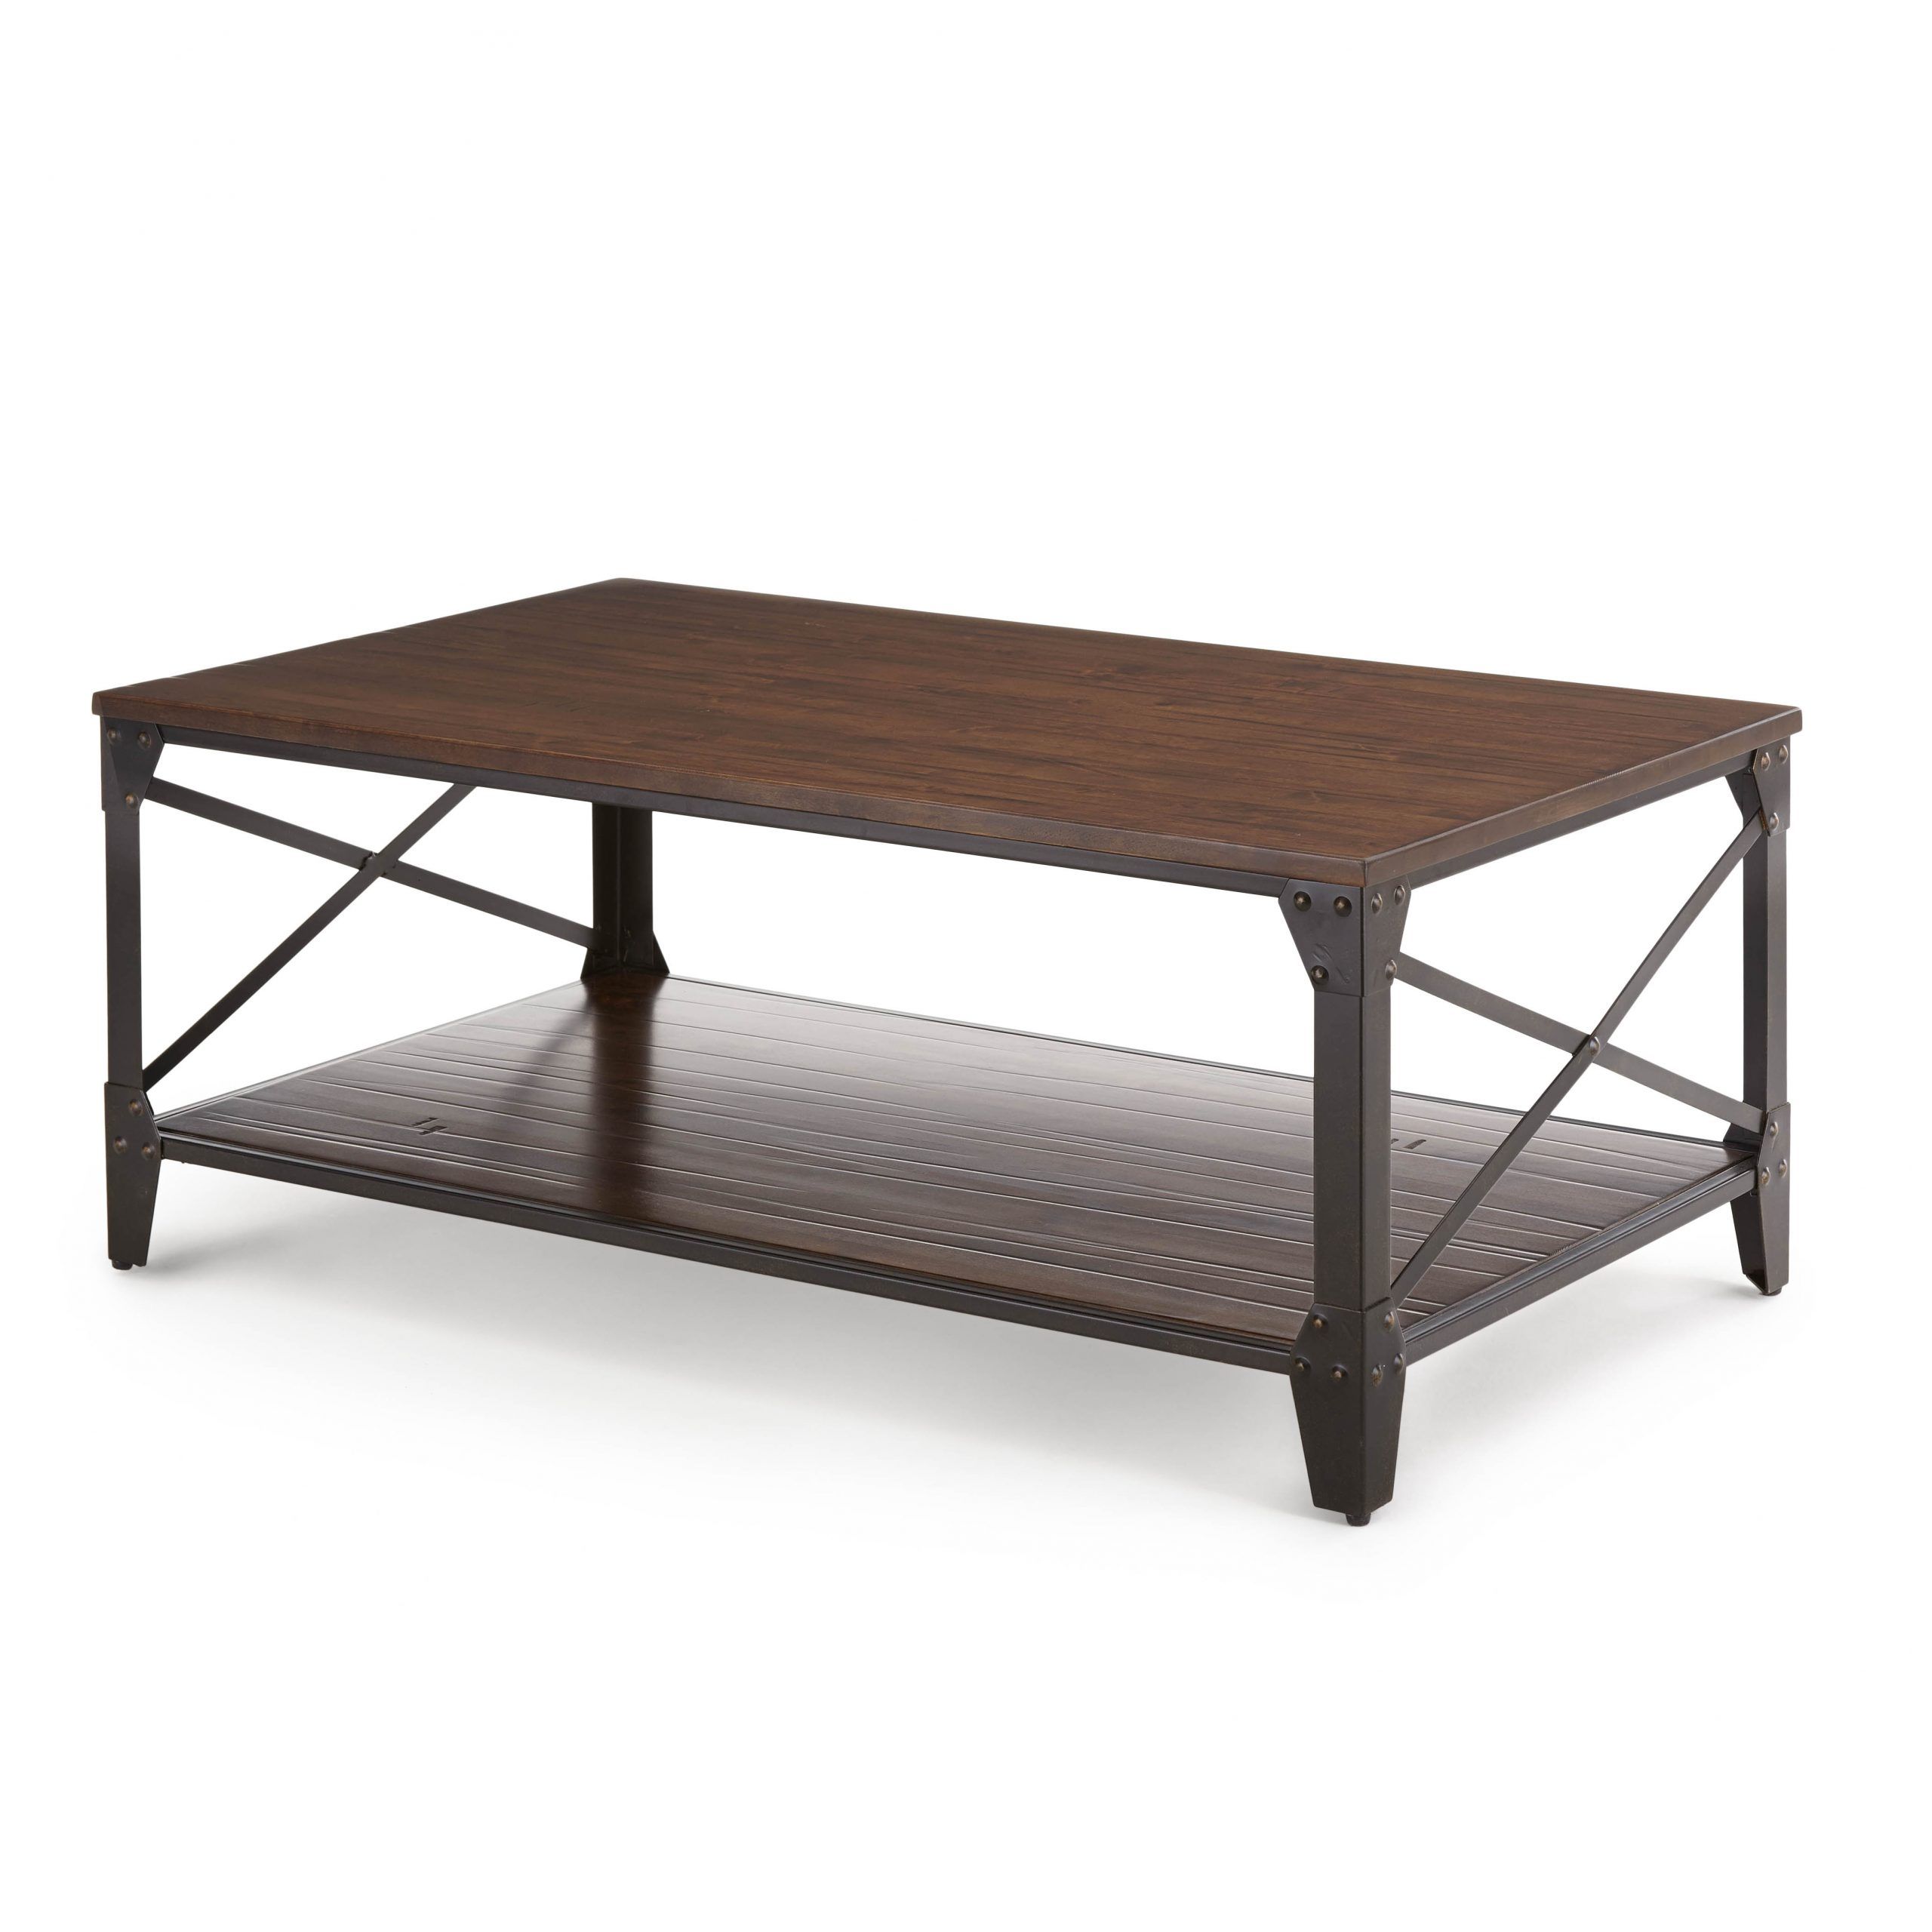 Steve Silver Winston Rectangle Distressed Tobacco Wood And With Regard To Popular Antique Silver Metal Coffee Tables (Gallery 1 of 20)